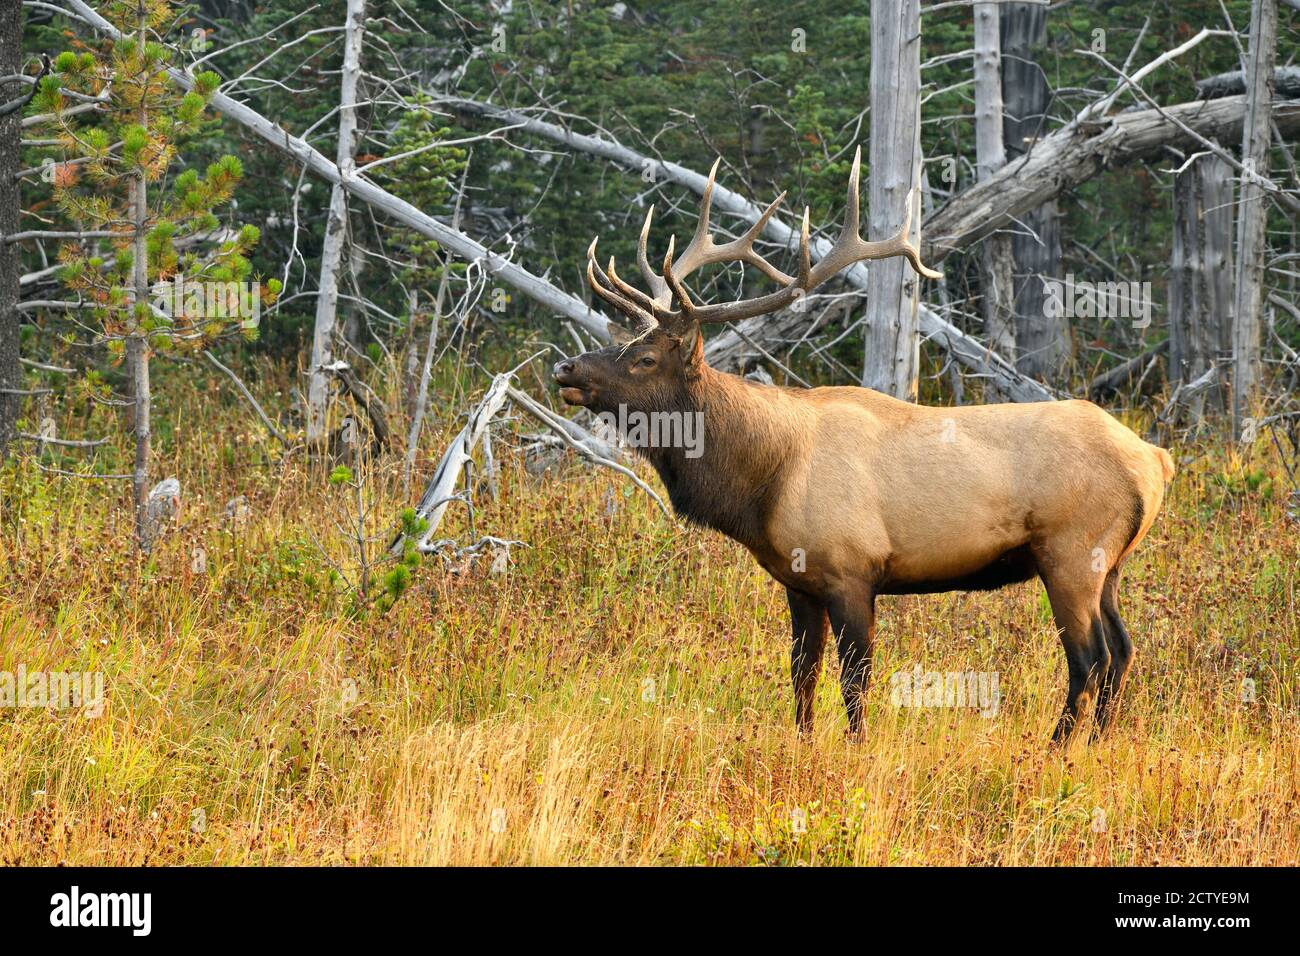 A wild bull elk 'Cervus alaphus', stopping to call from a wooded area in rural Alberta Canada. Stock Photo